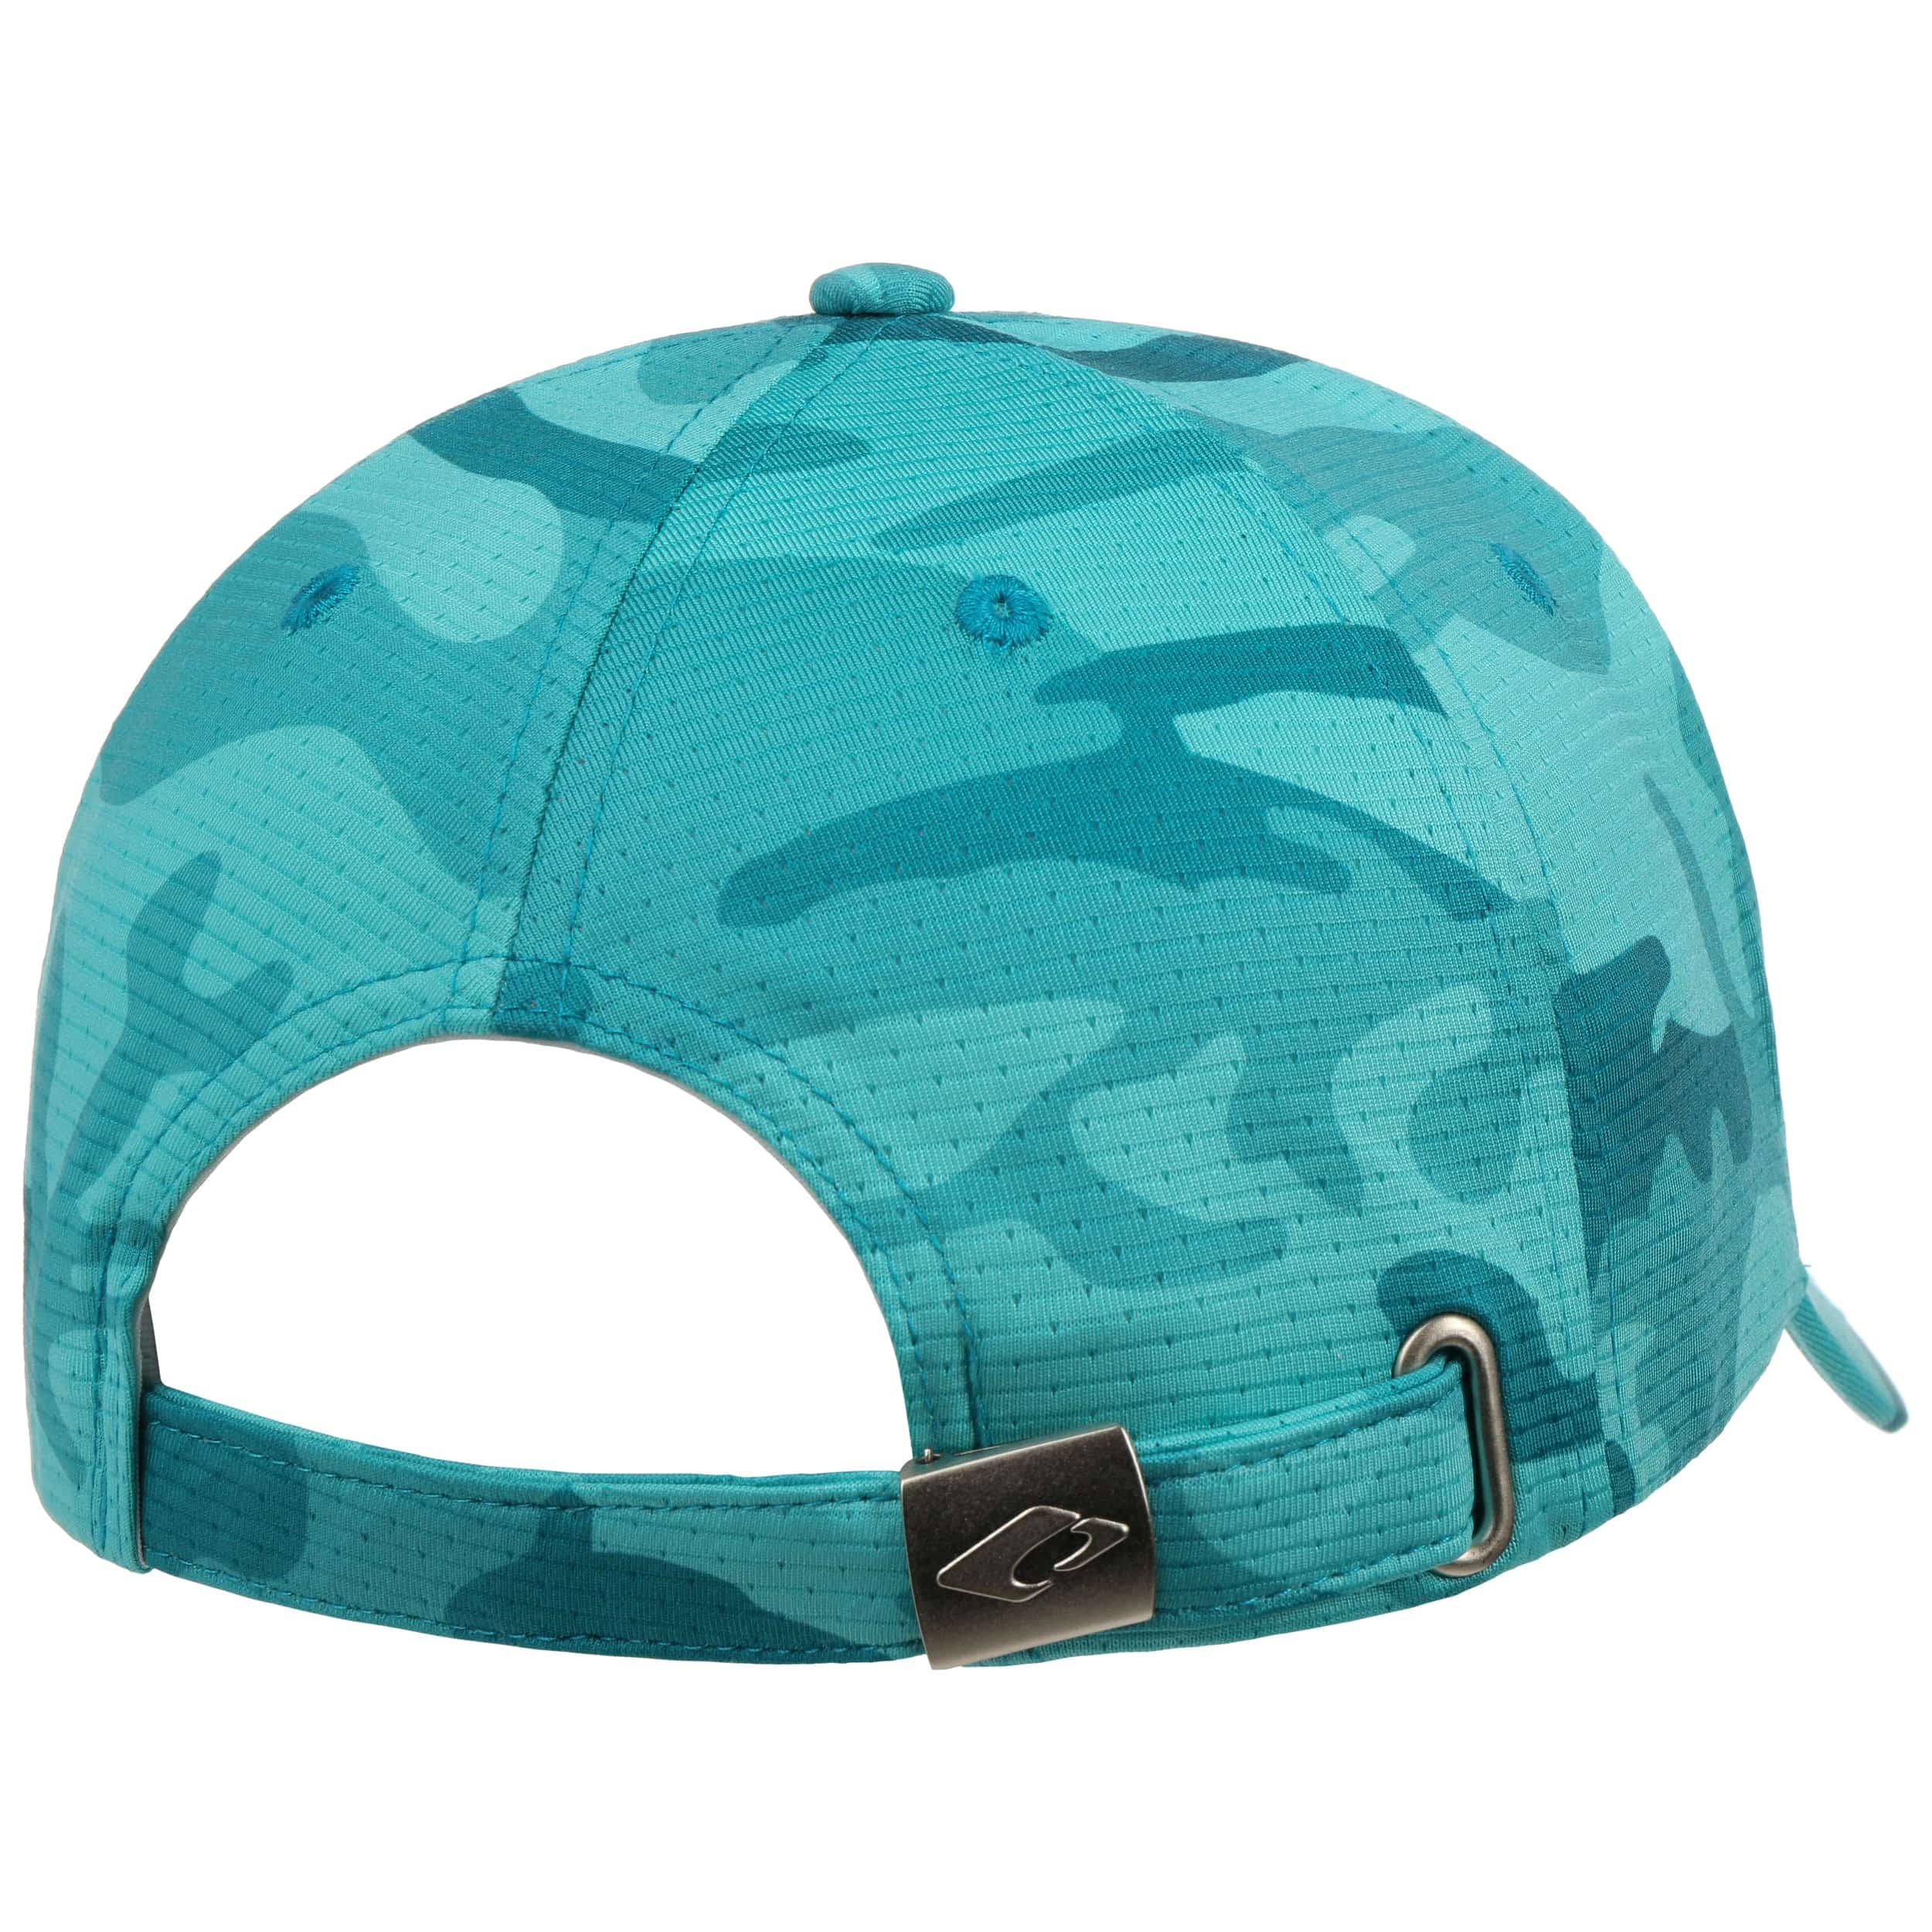 Kampala Camouflage - € 26,95 by Chillouts Cap